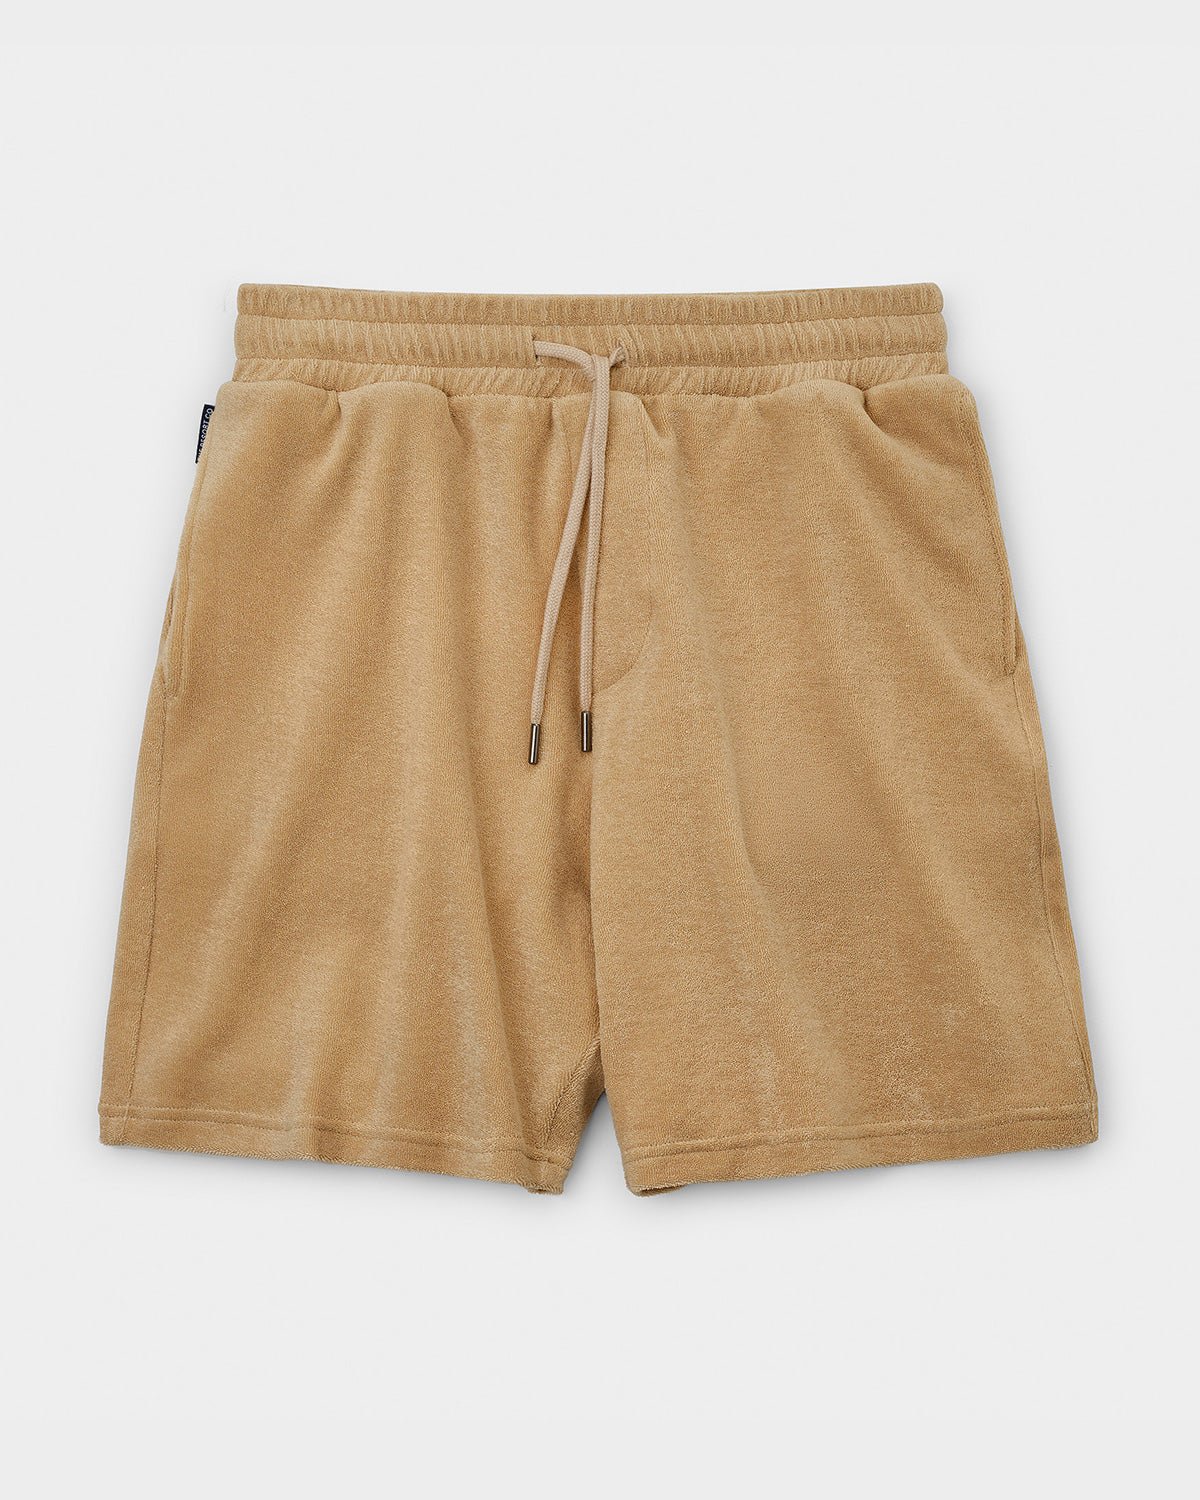 Terry Shorts Caramel - THE RESORT CO